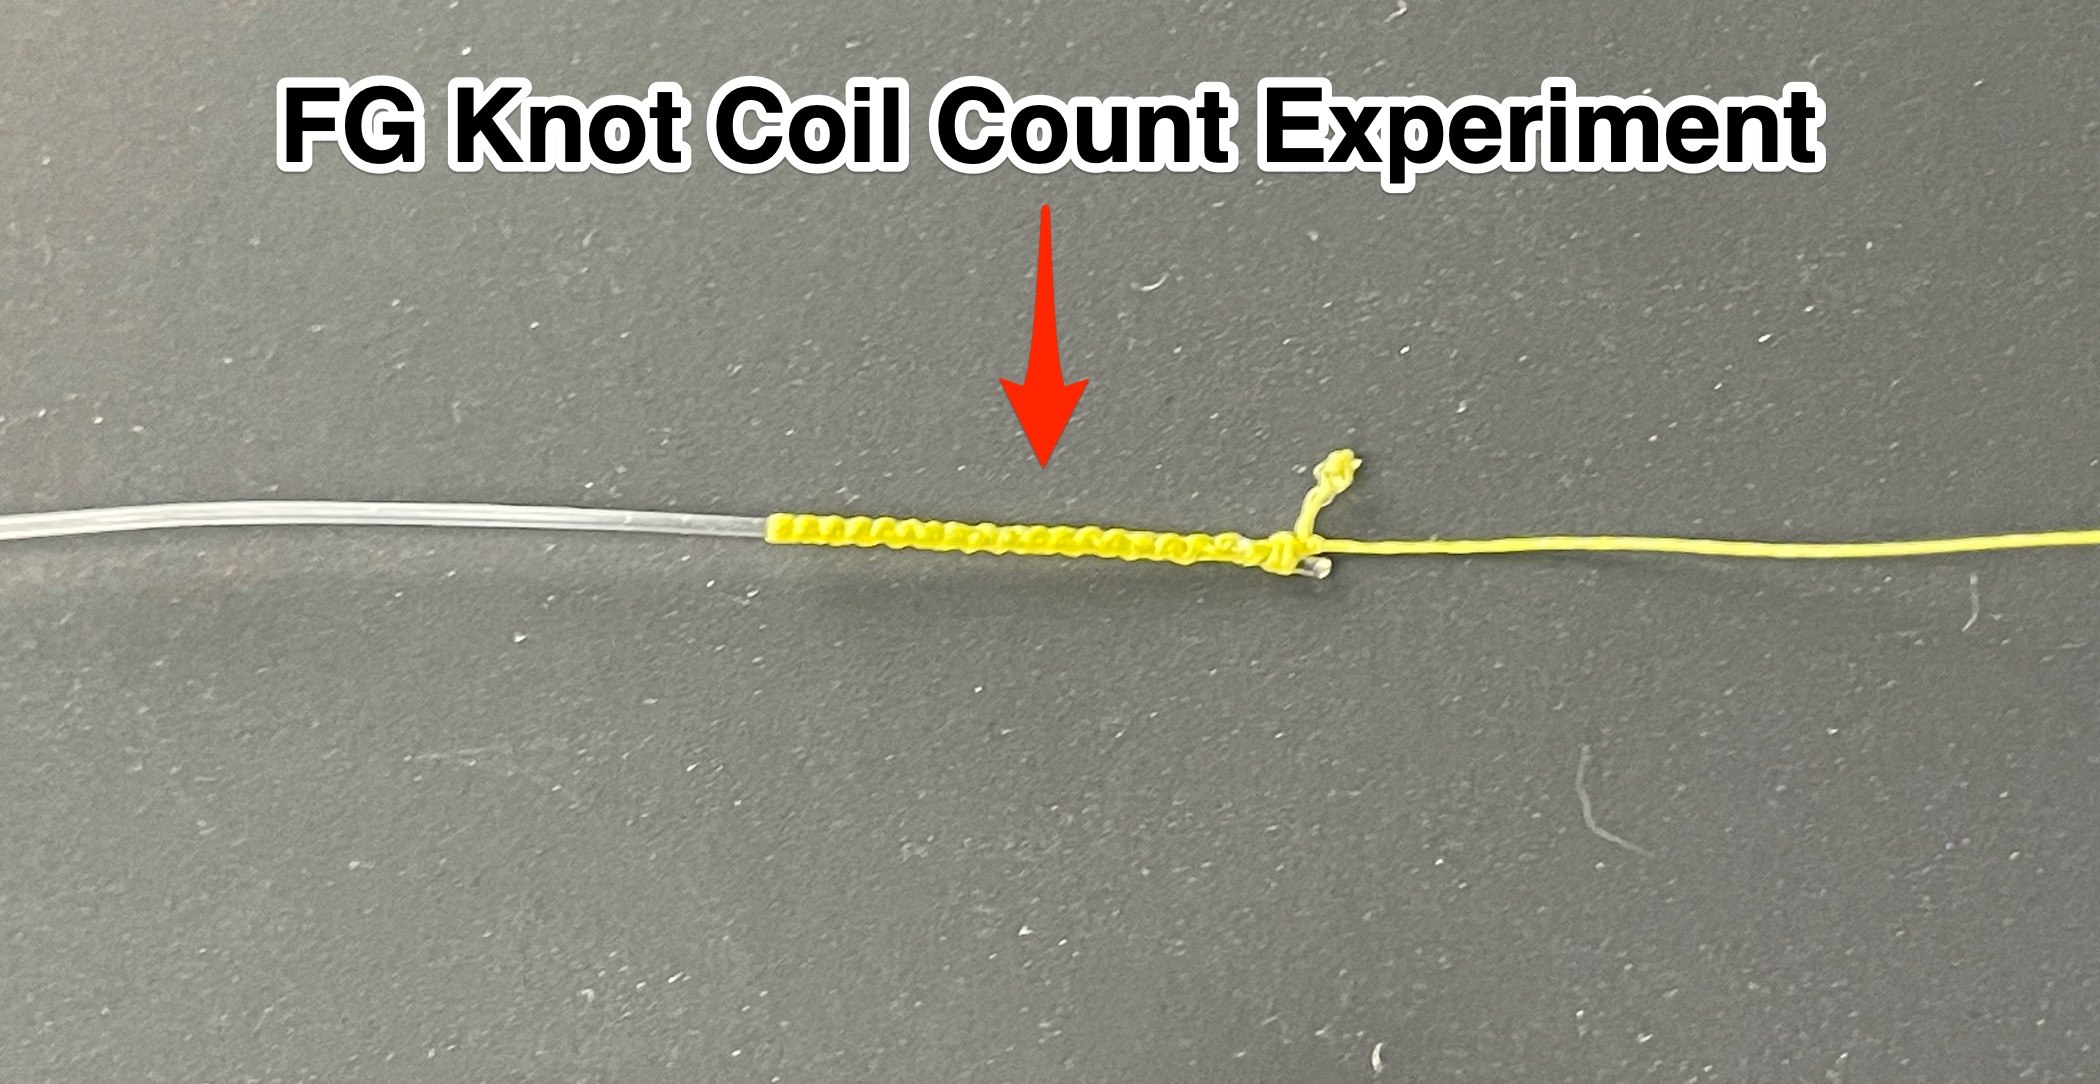 http://fg%20knot%20coil%20count